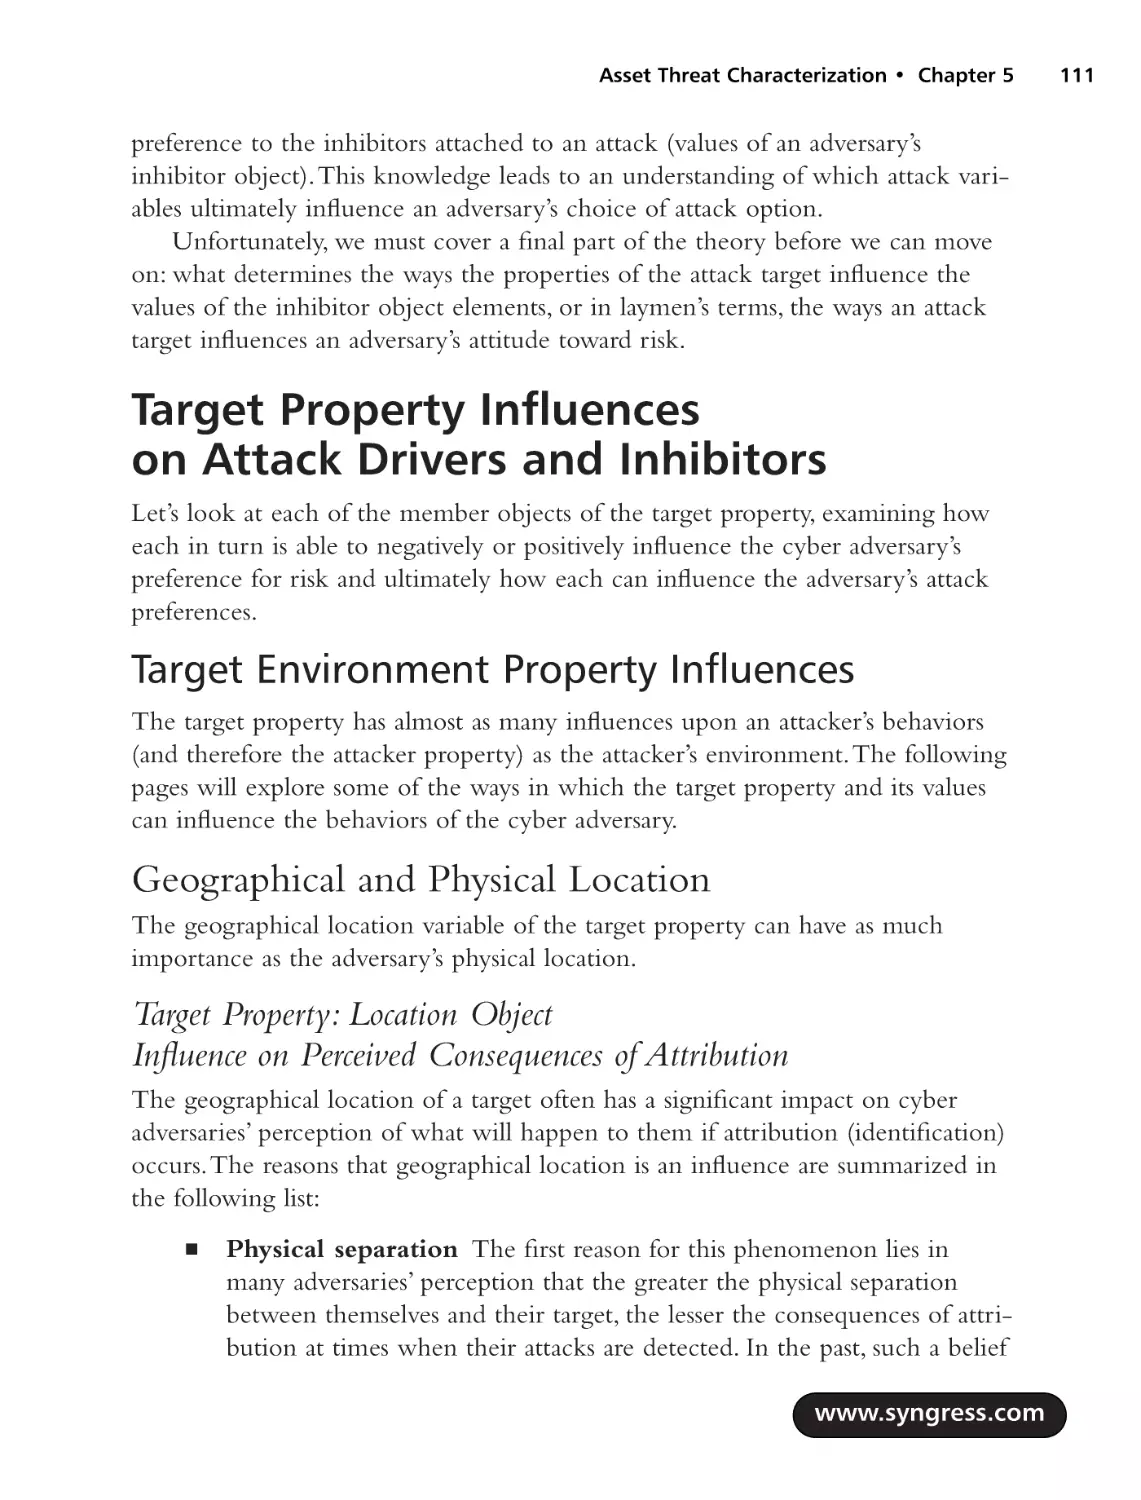 Target Properties
Target Environment Property Influences
Geographical and Physical Location